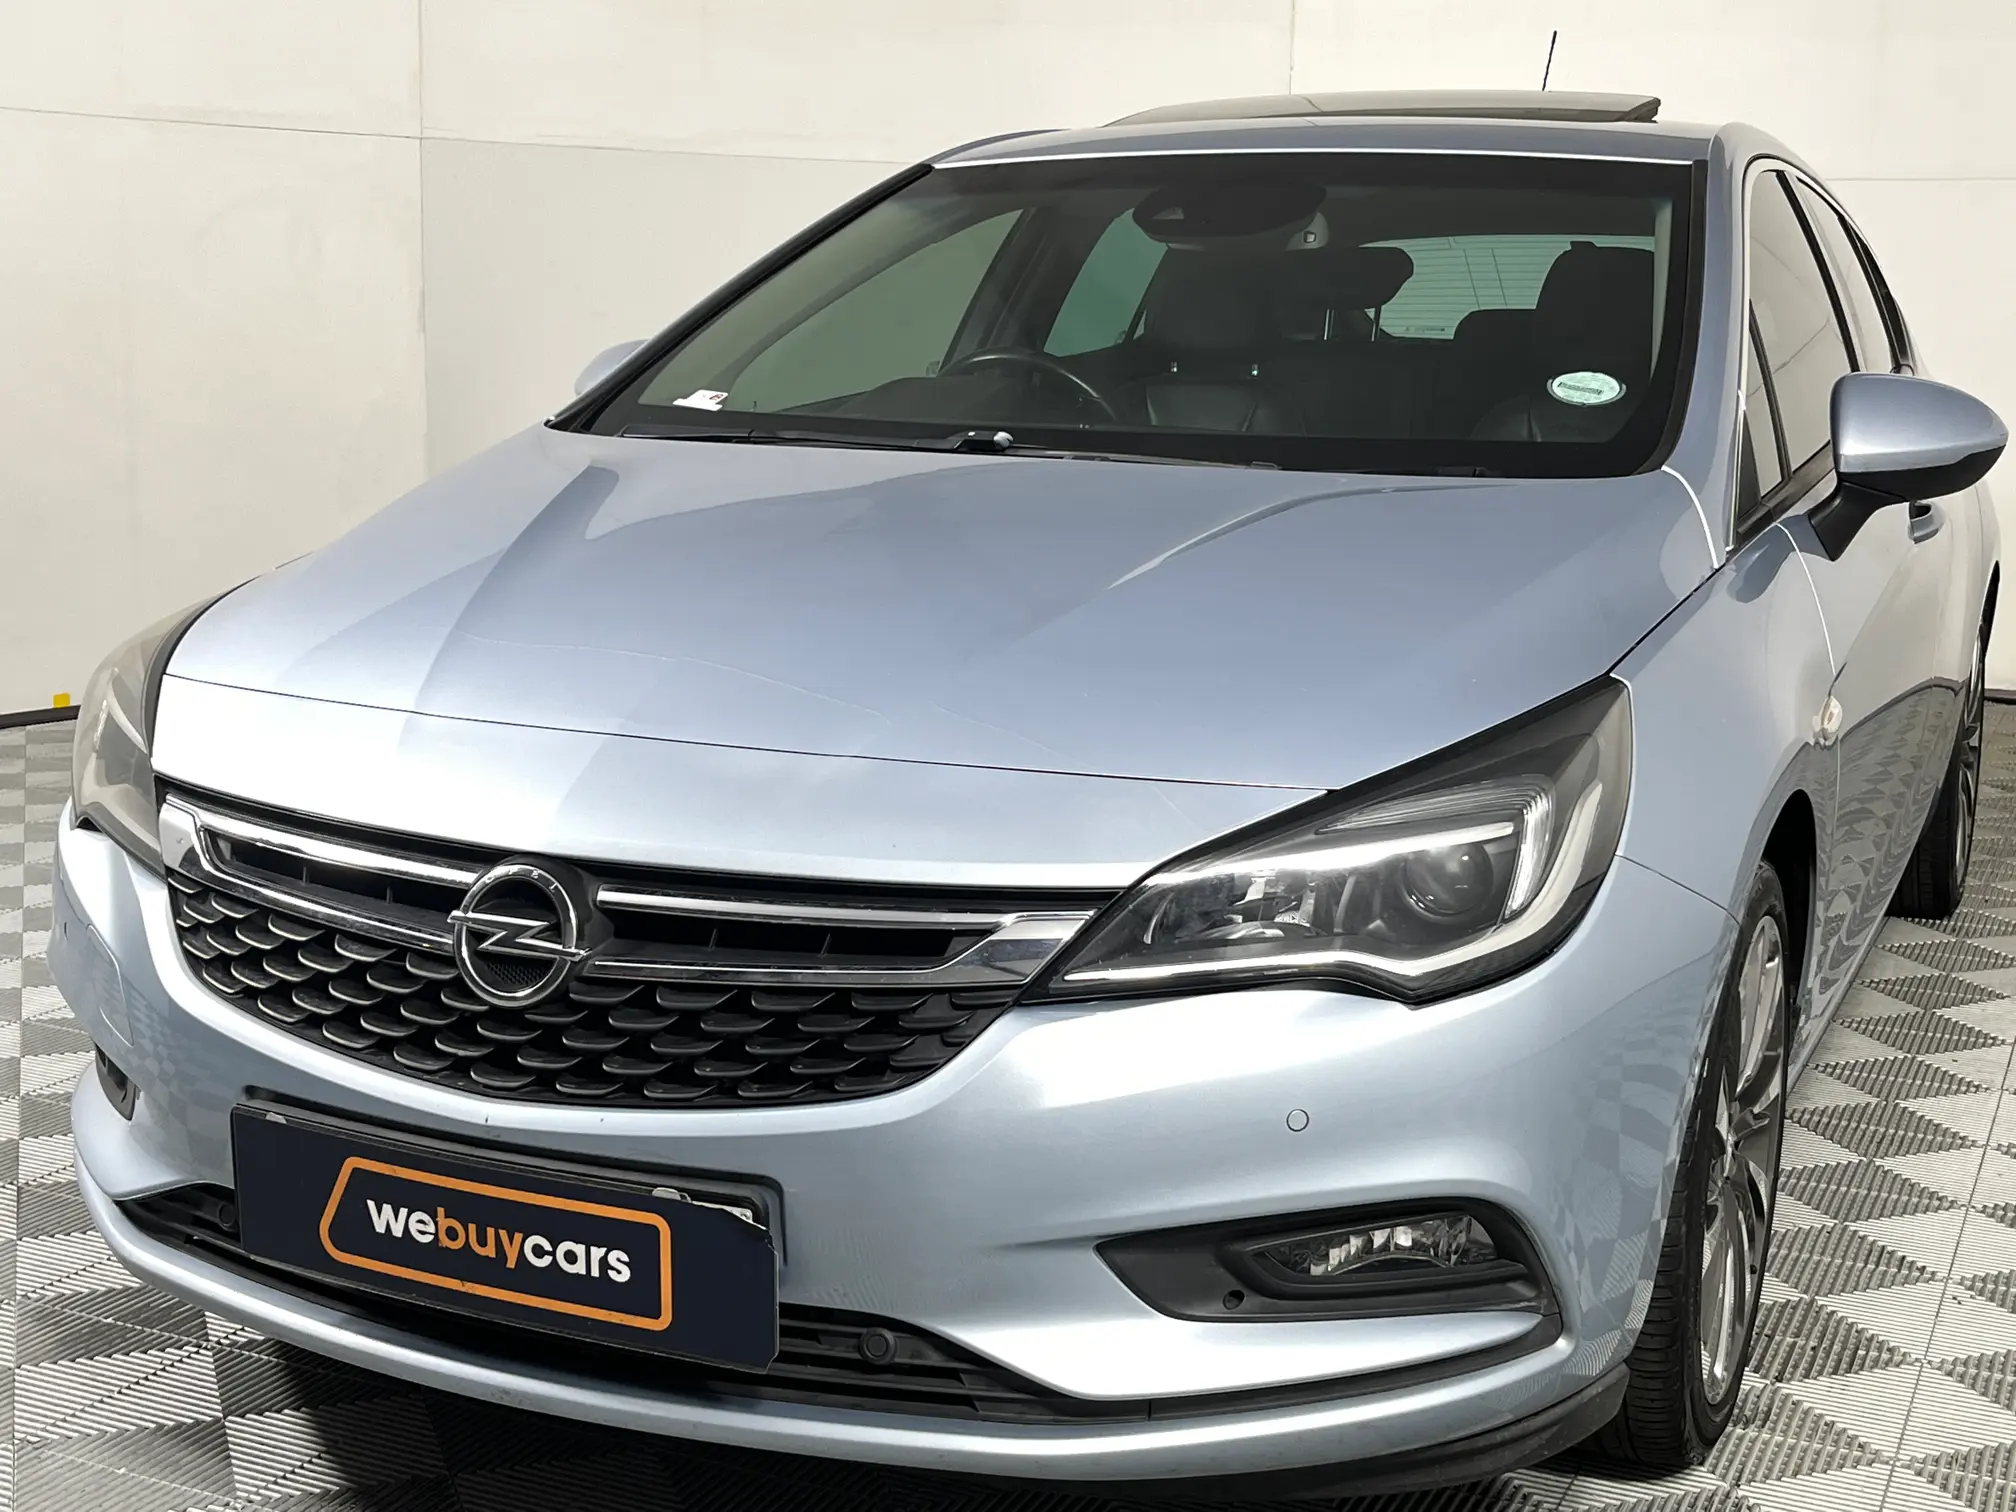 2017 Opel Astra 1.4T Sport Auto (5dr)